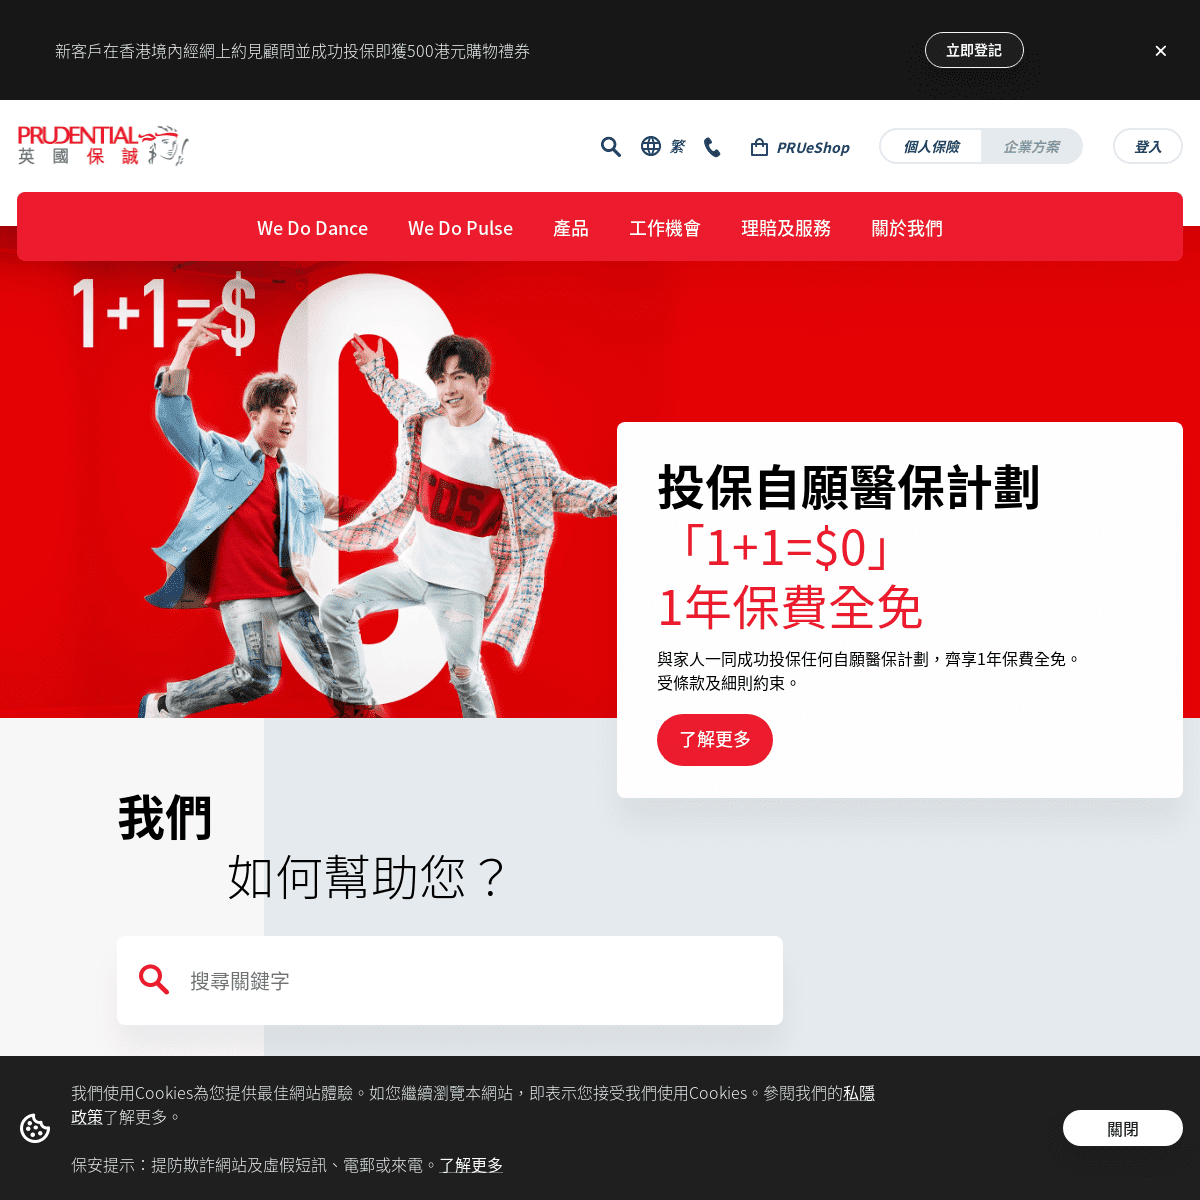 A complete backup of https://prudential.com.hk